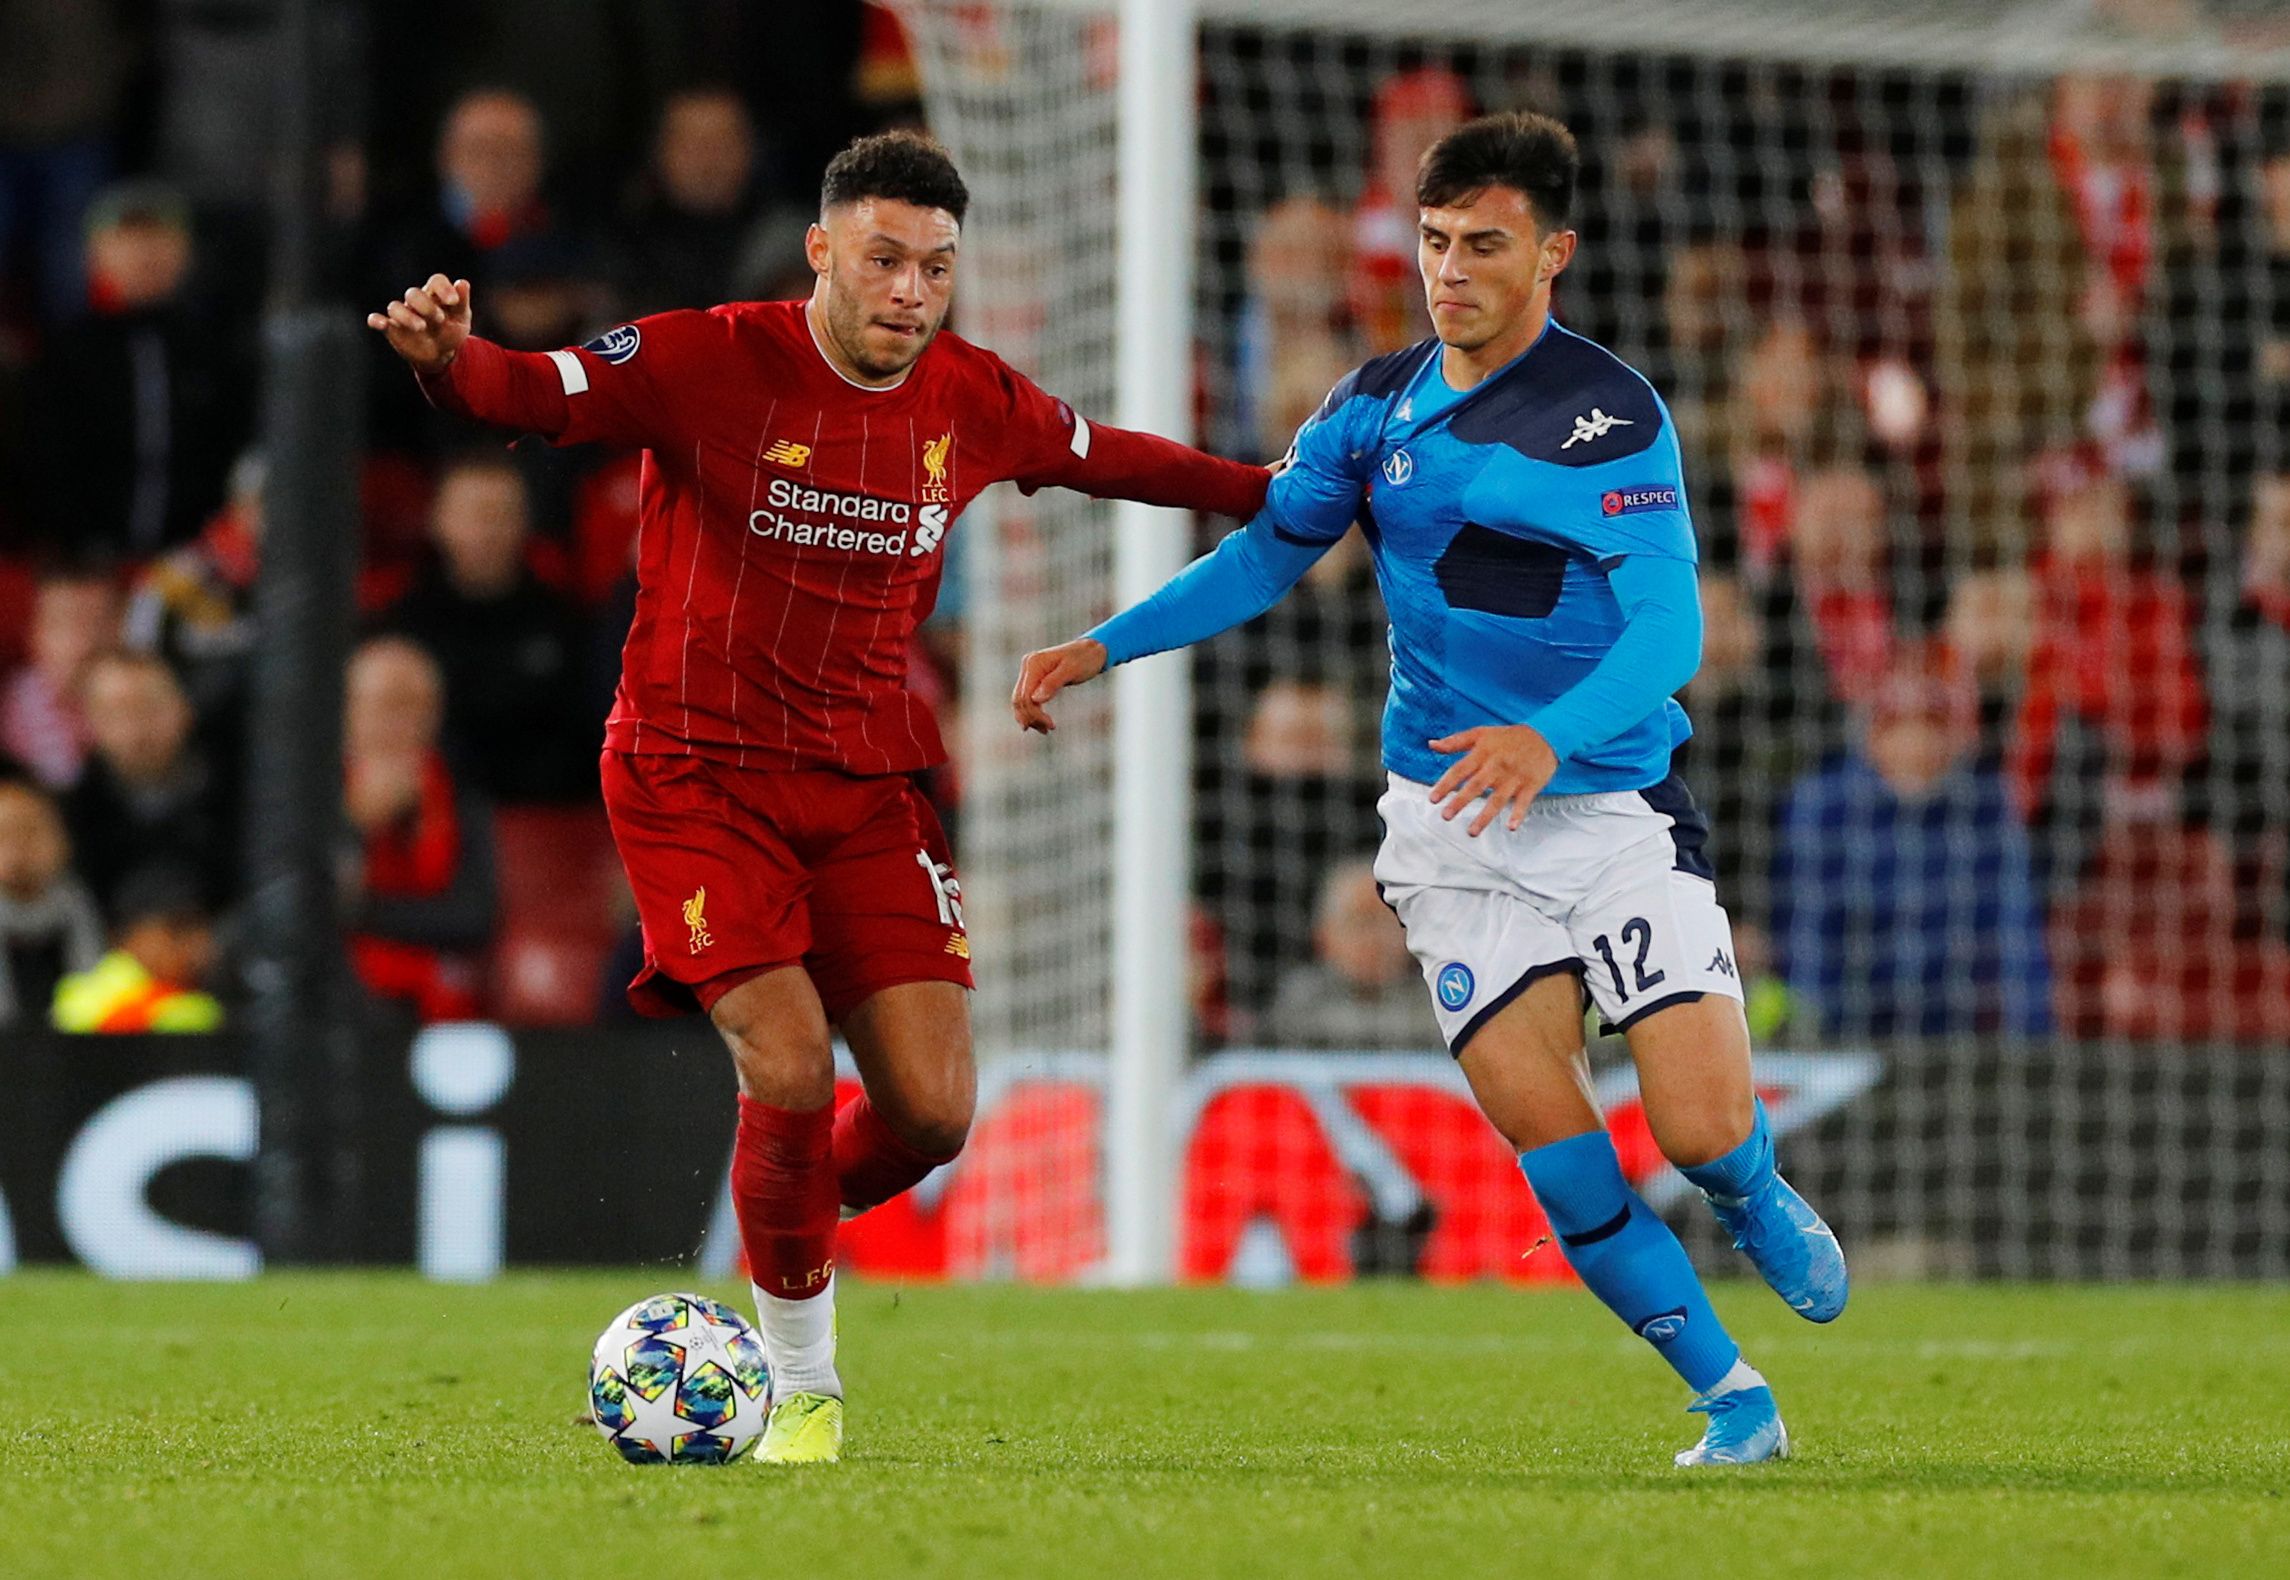 Soccer Football - Champions League - Group E - Liverpool v Napoli - Anfield, Liverpool, Britain - November 27, 2019  Liverpool's Alex Oxlade-Chamberlain in action with Napoli's Elif Elmas    REUTERS/Phil Noble